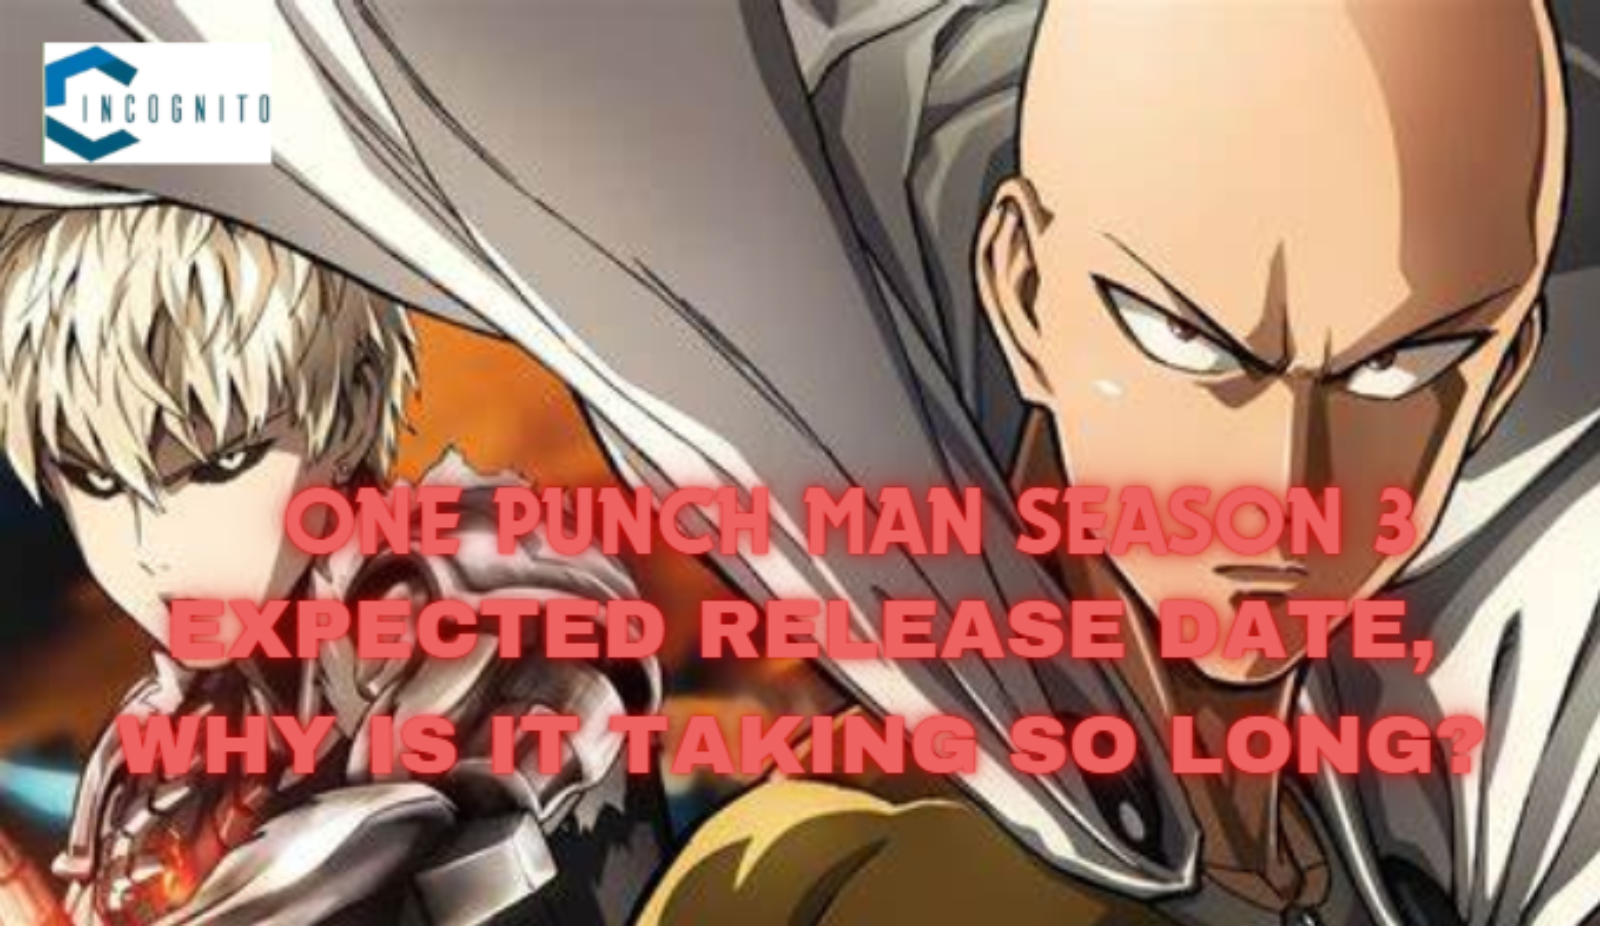 One Punch Man Season 3 Expected Release Date, Why Is It Taking So Long?